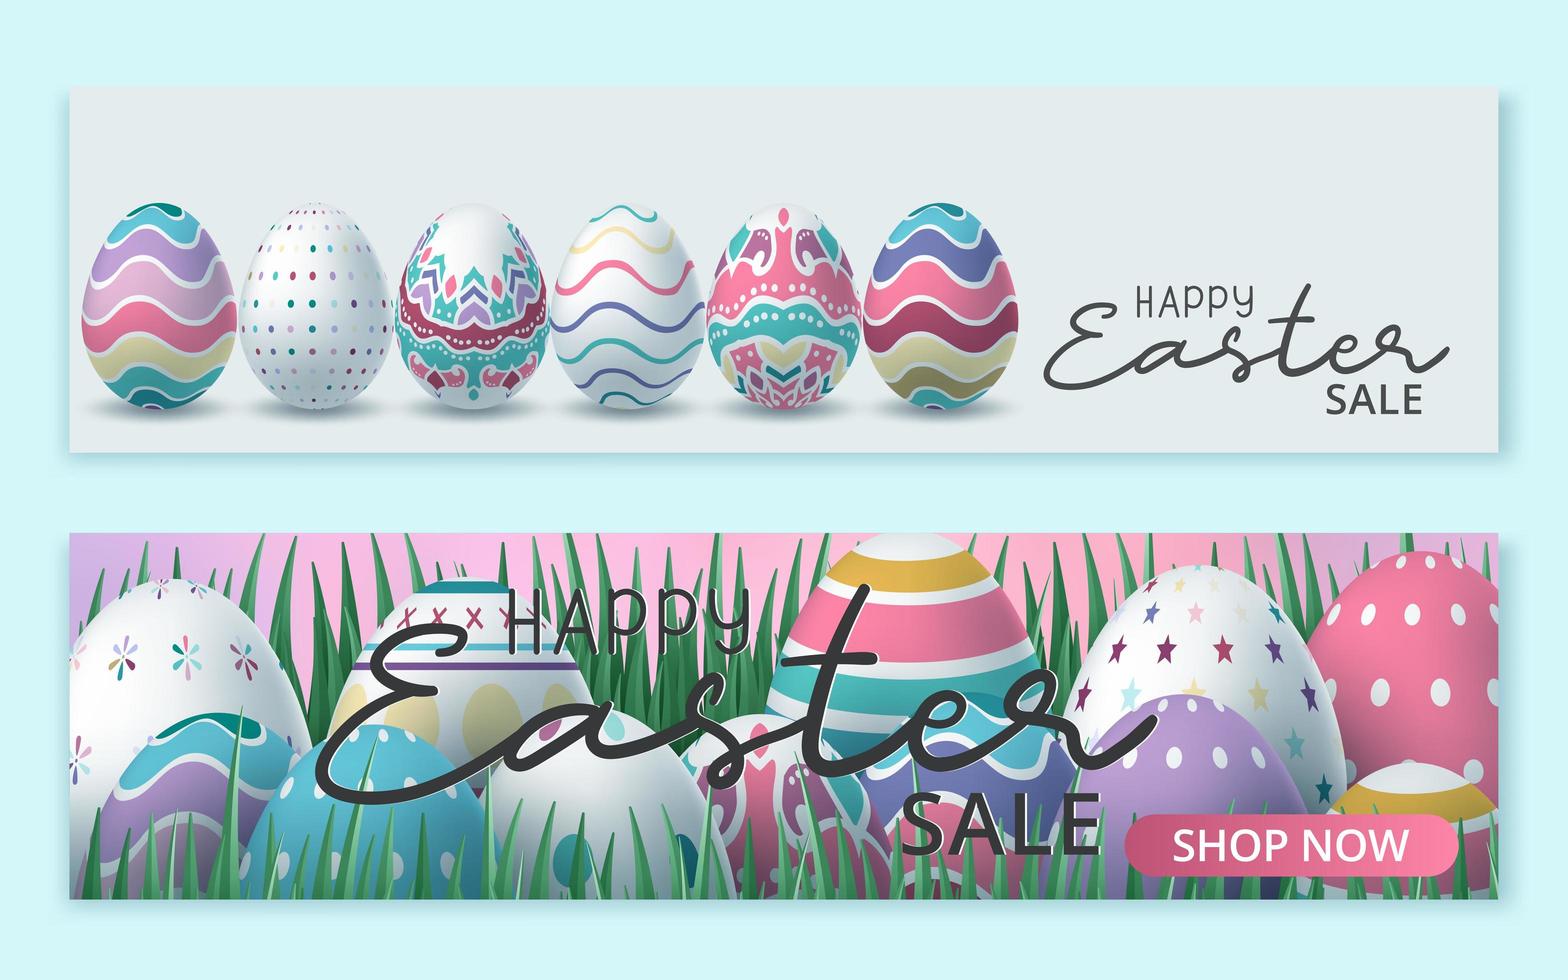 Happy Easter sale banner with Easter Eggs vector